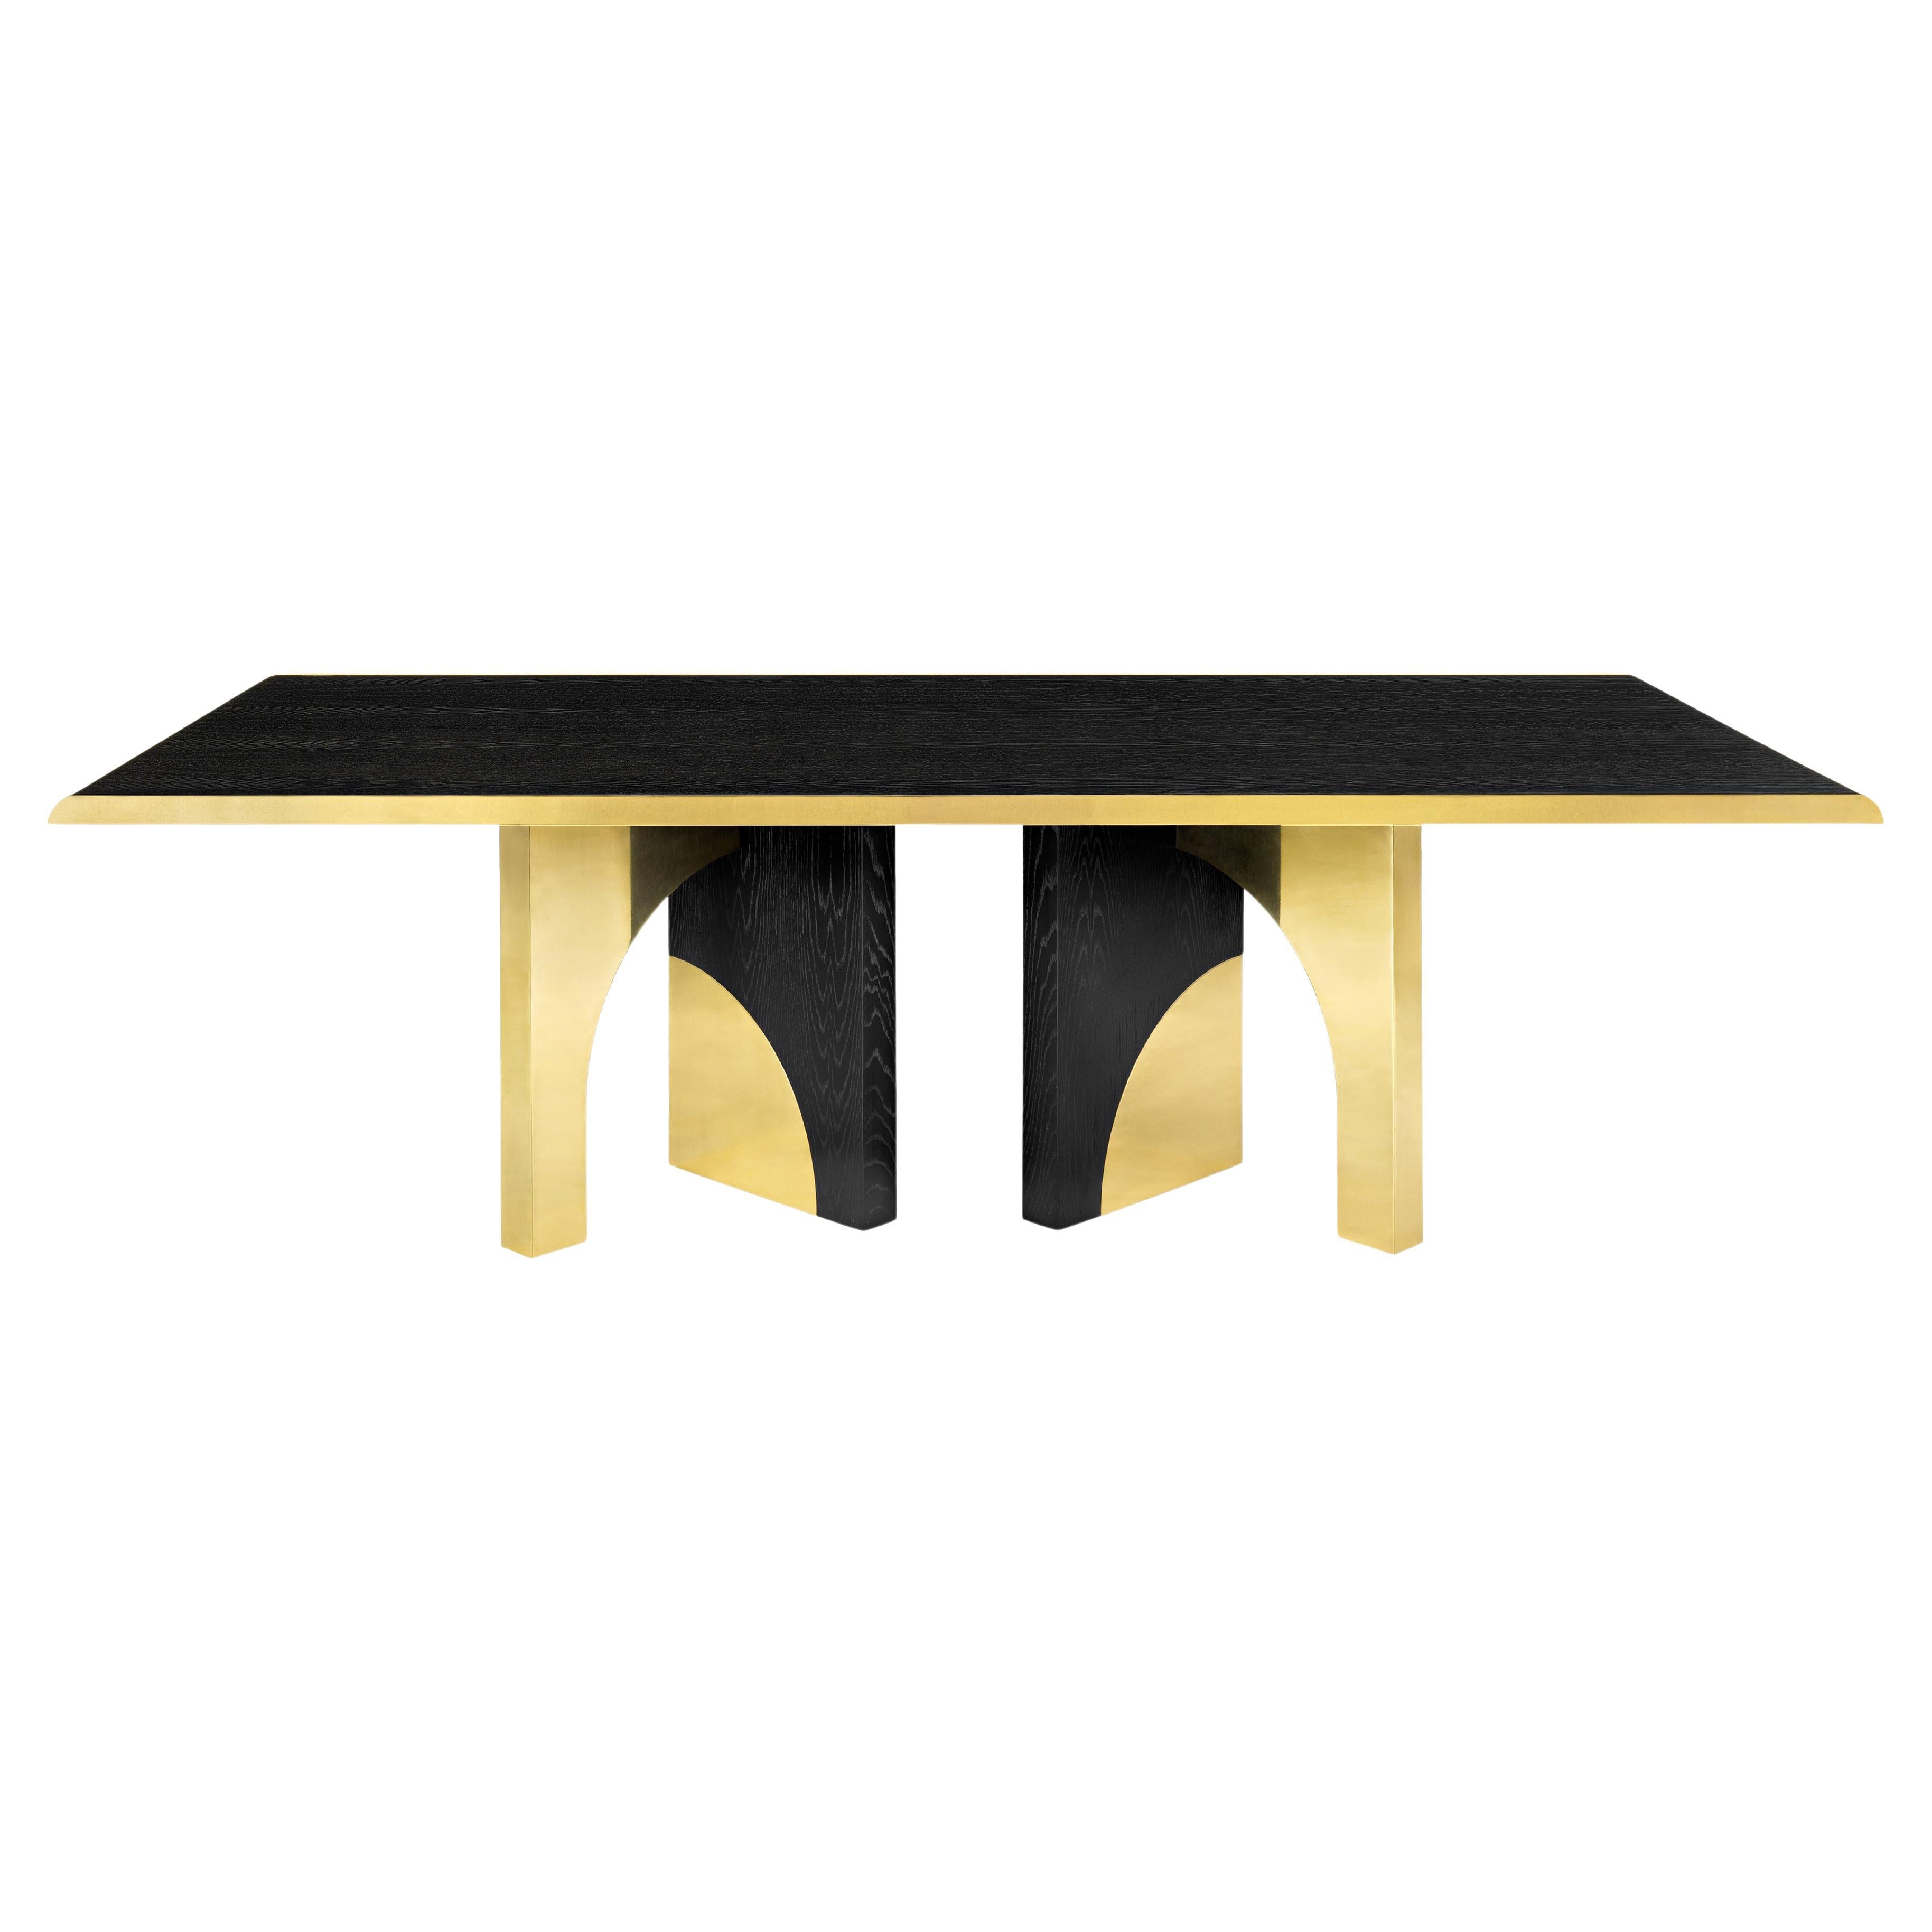 Utopia Dining Table by InsidherLand